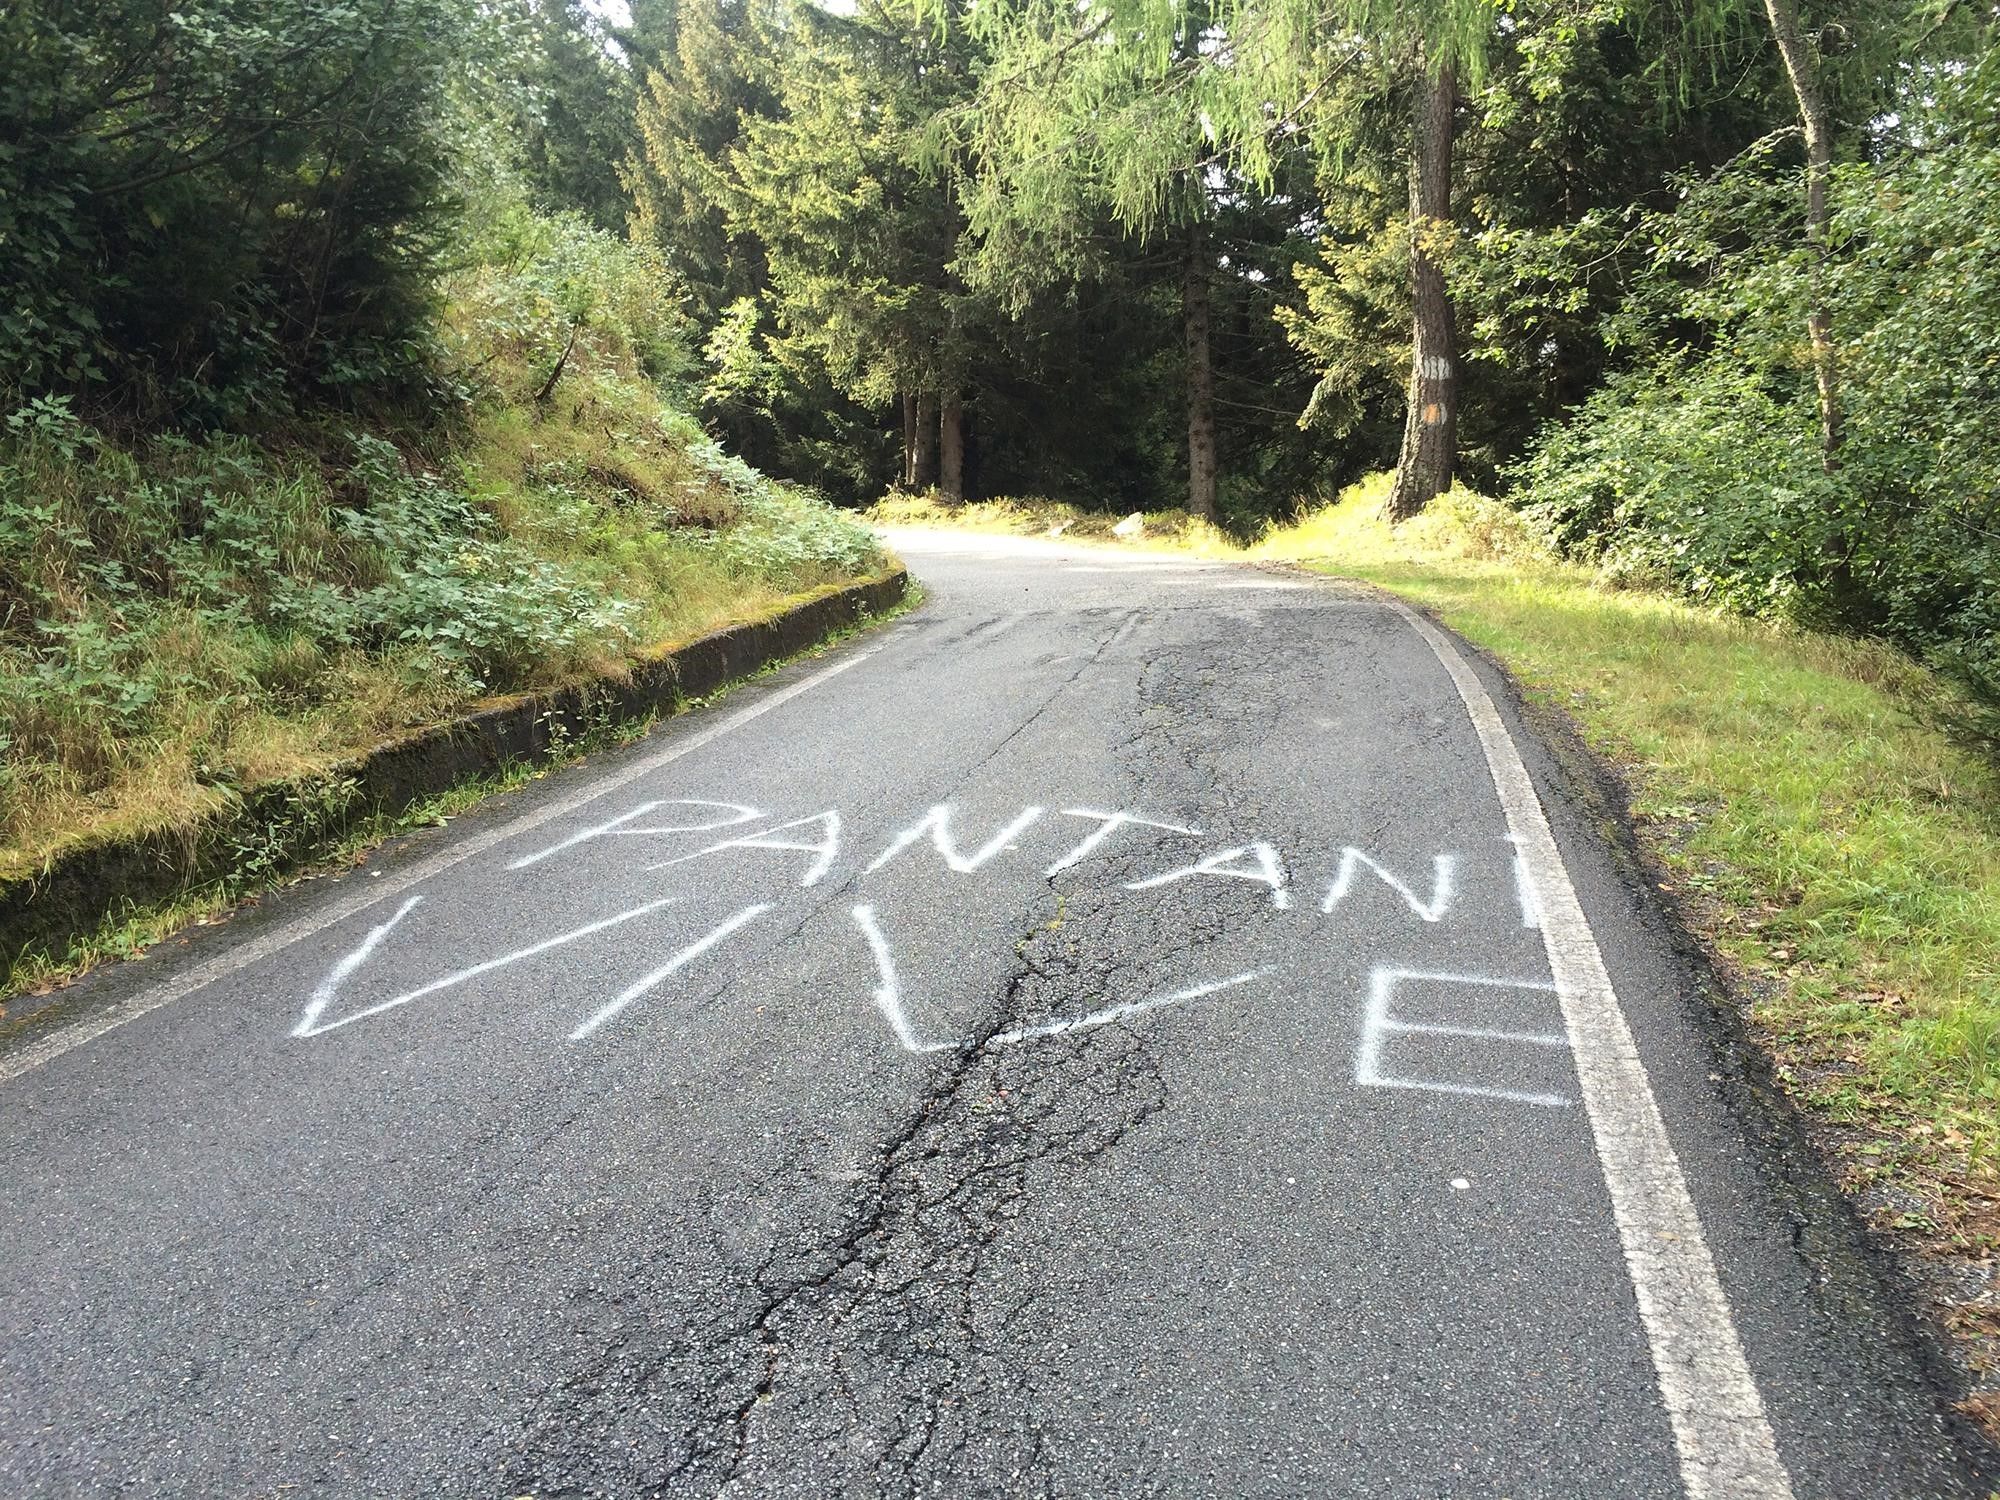 A photo I took when climbing the Mortirolo in Lombardy, northern Italy showing what fans had written on the climb in honour of Pantani
